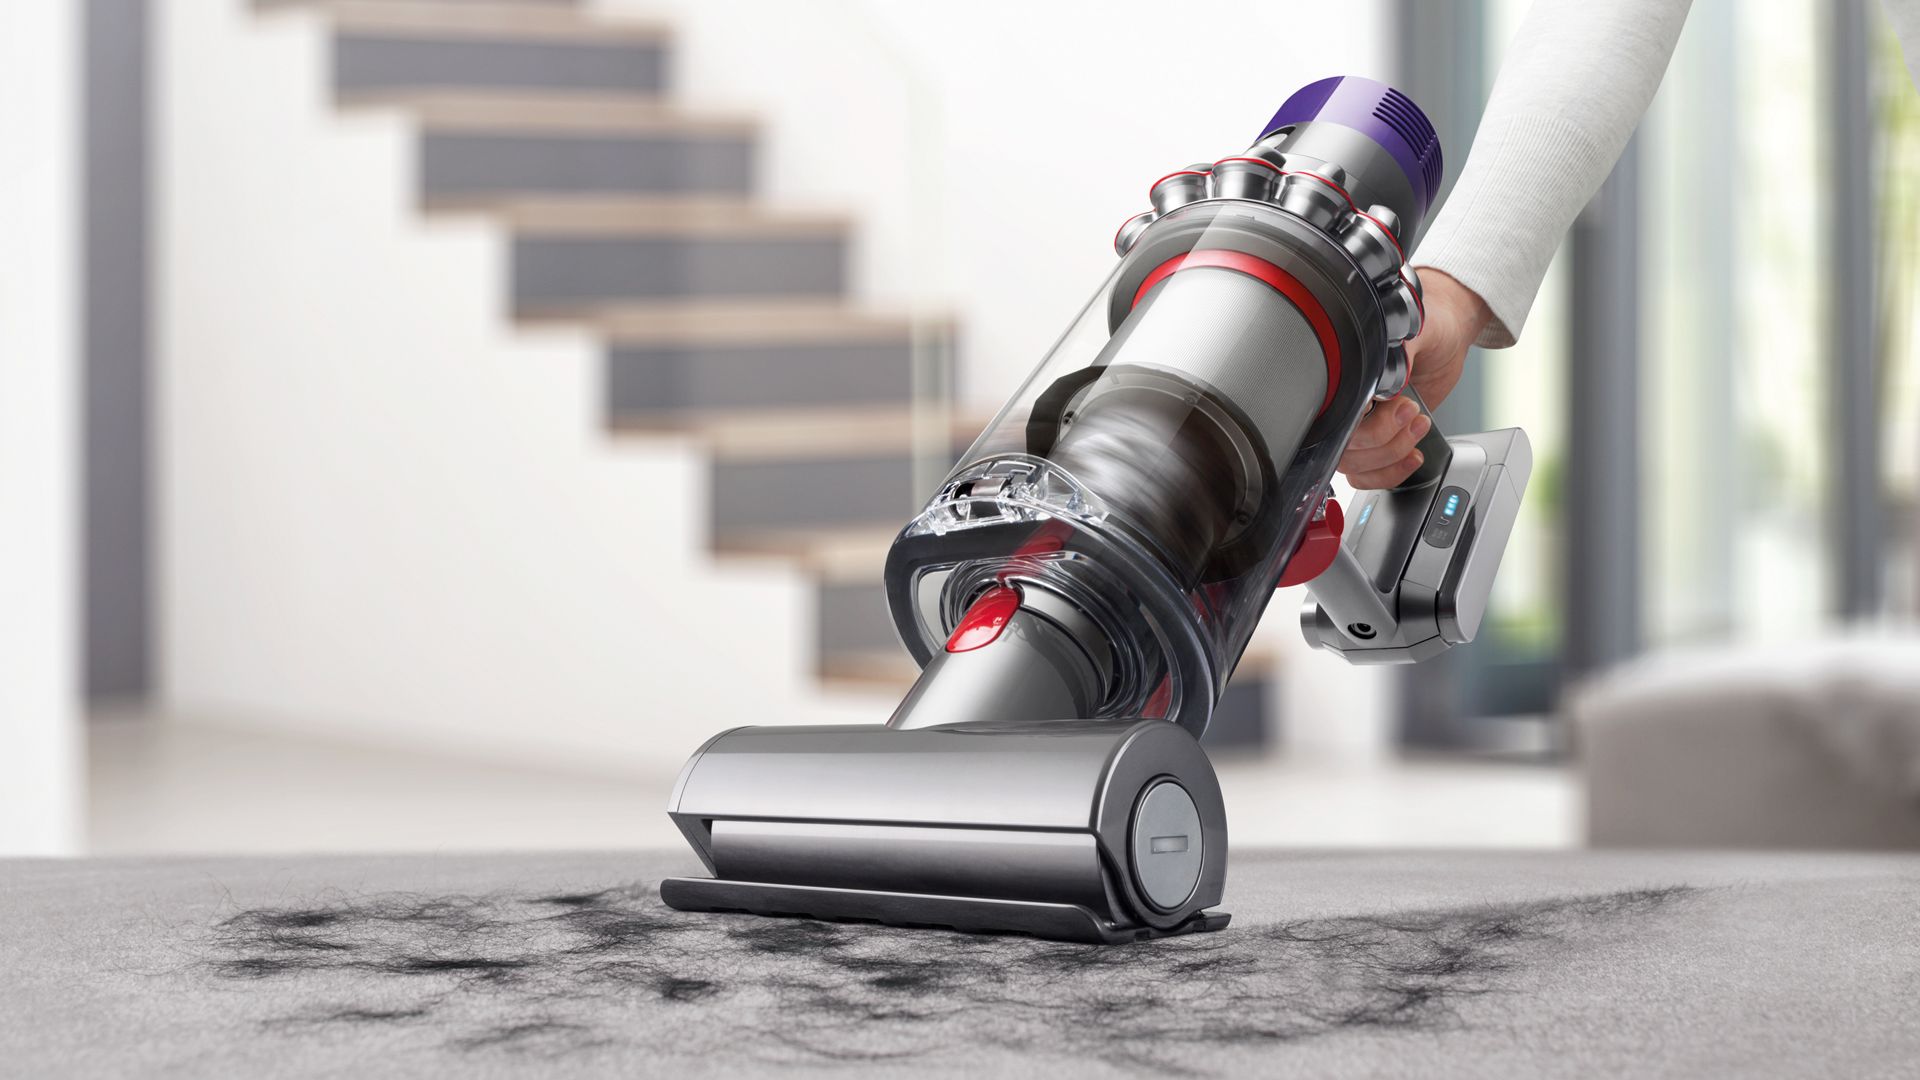 Dyson V10™ Absolute Cordless Vacuum Cleaner